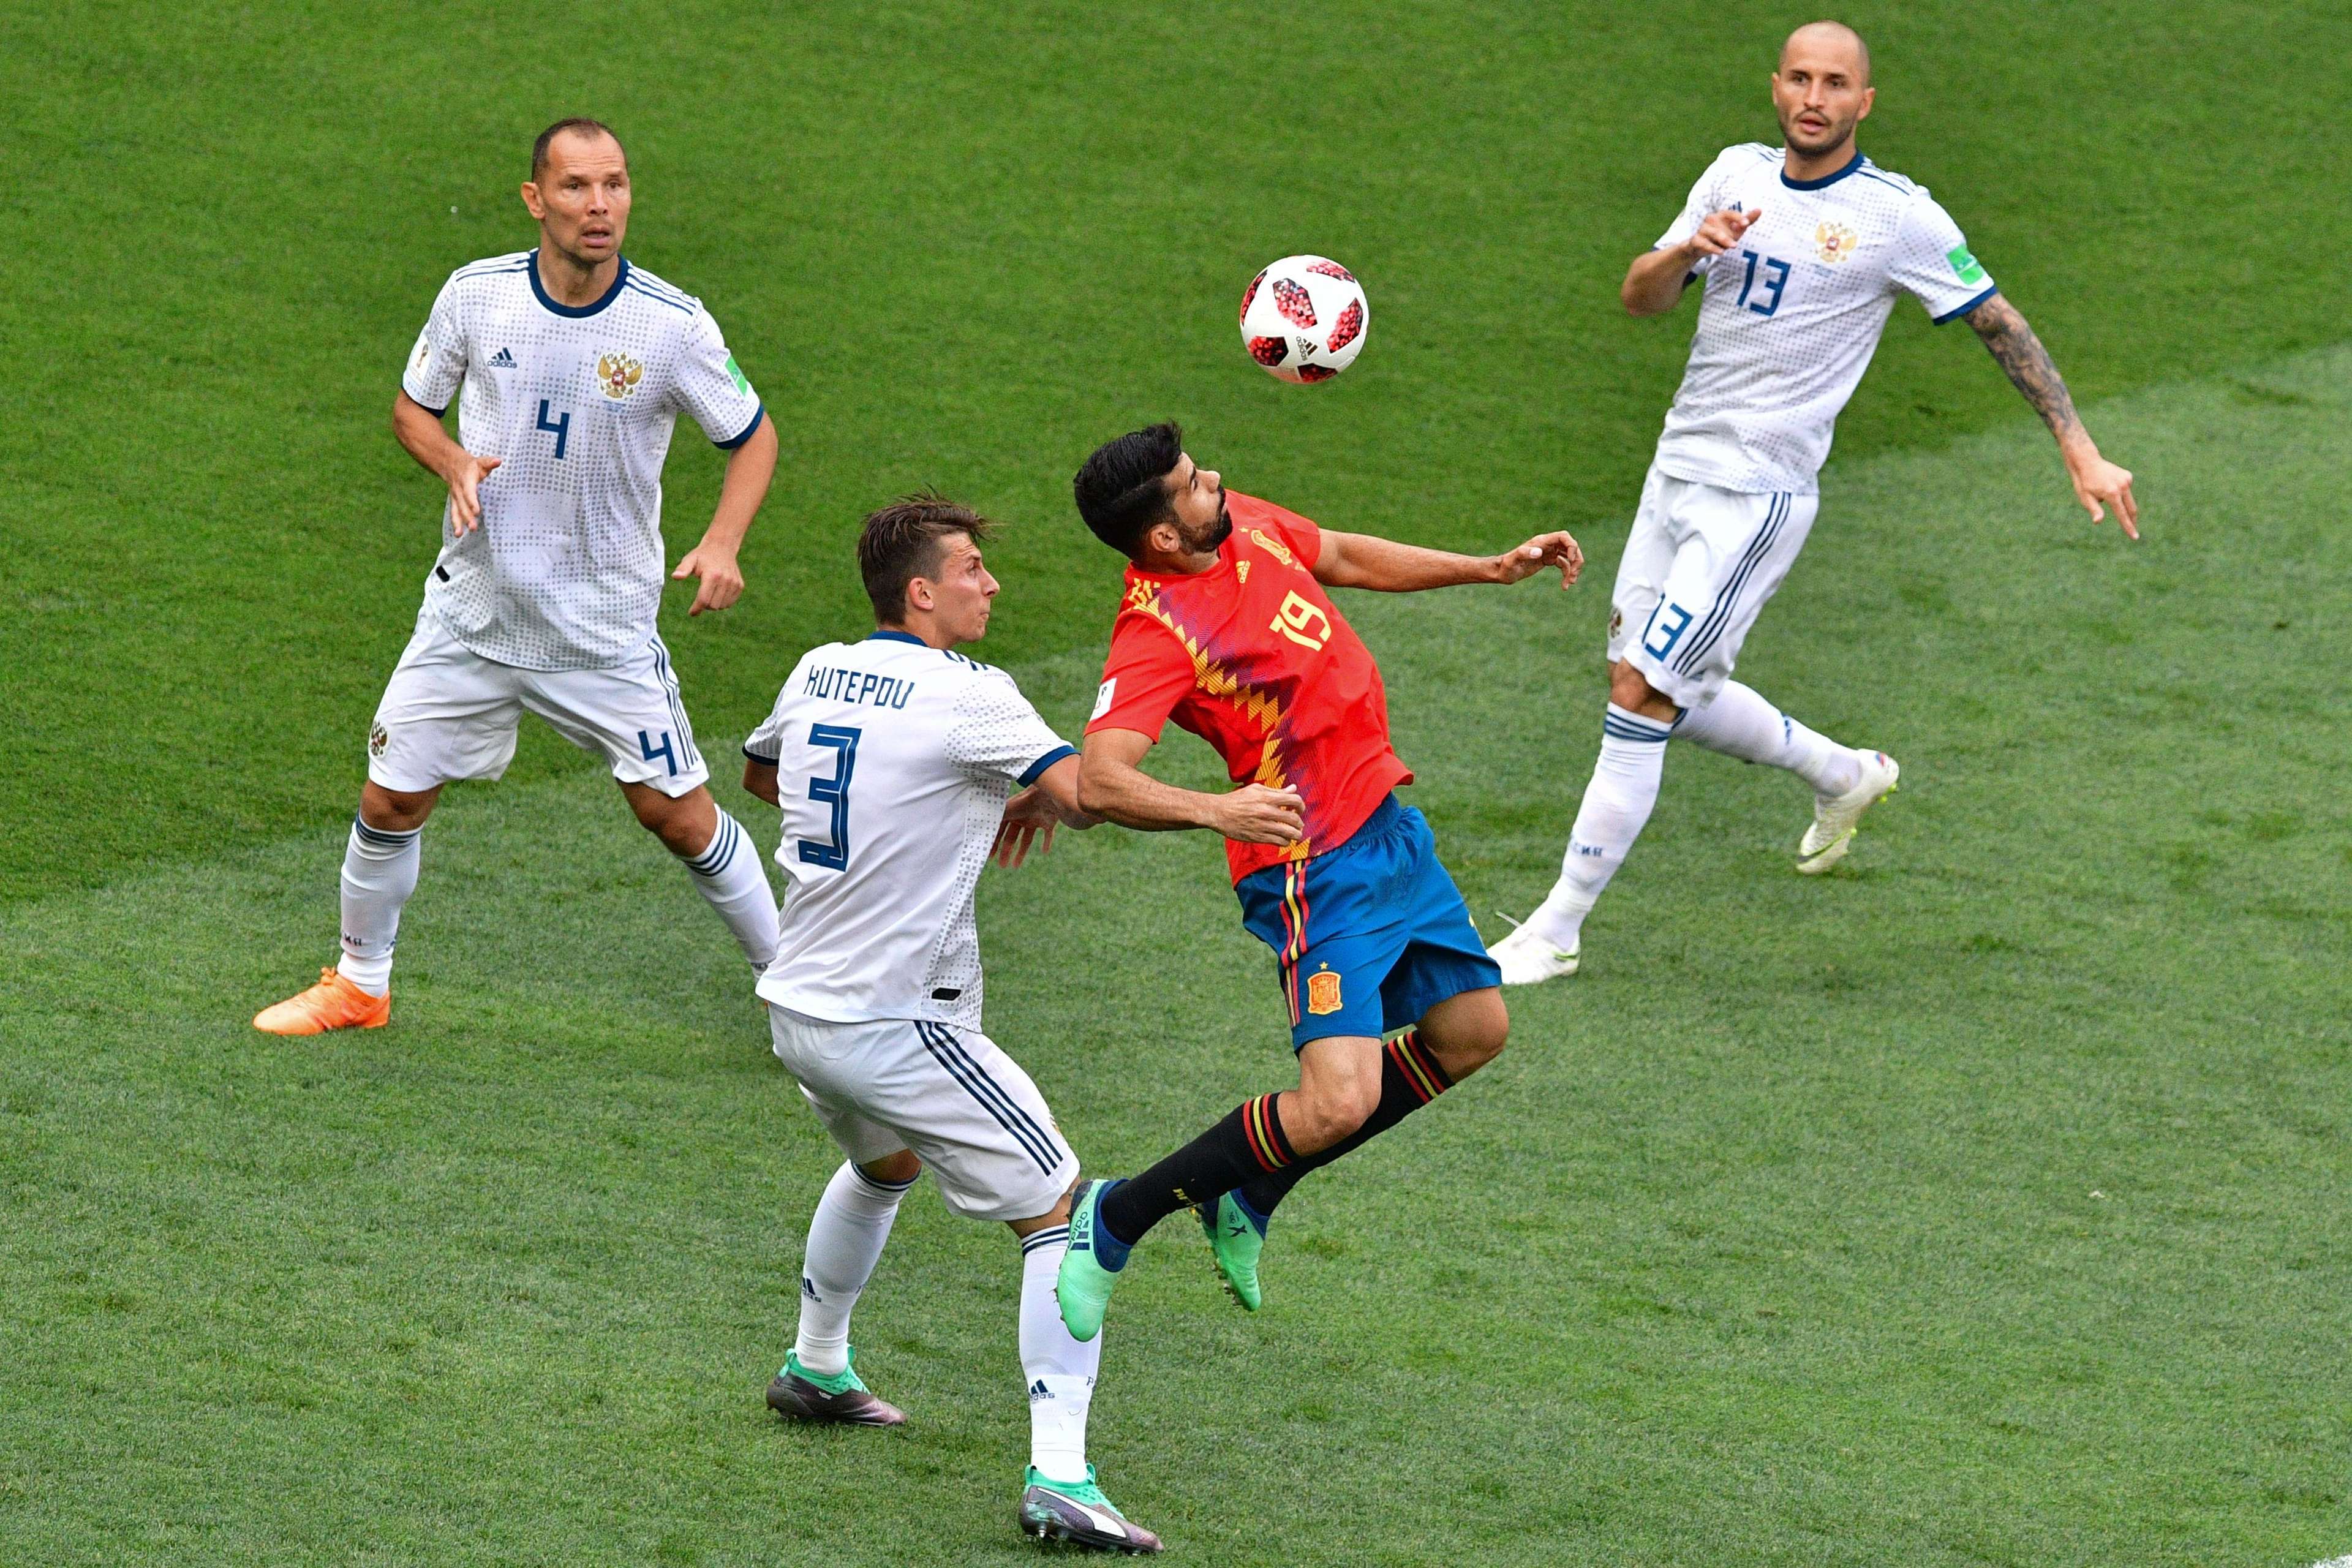 Diego Costa Spain Russia World Cup 07/01/18